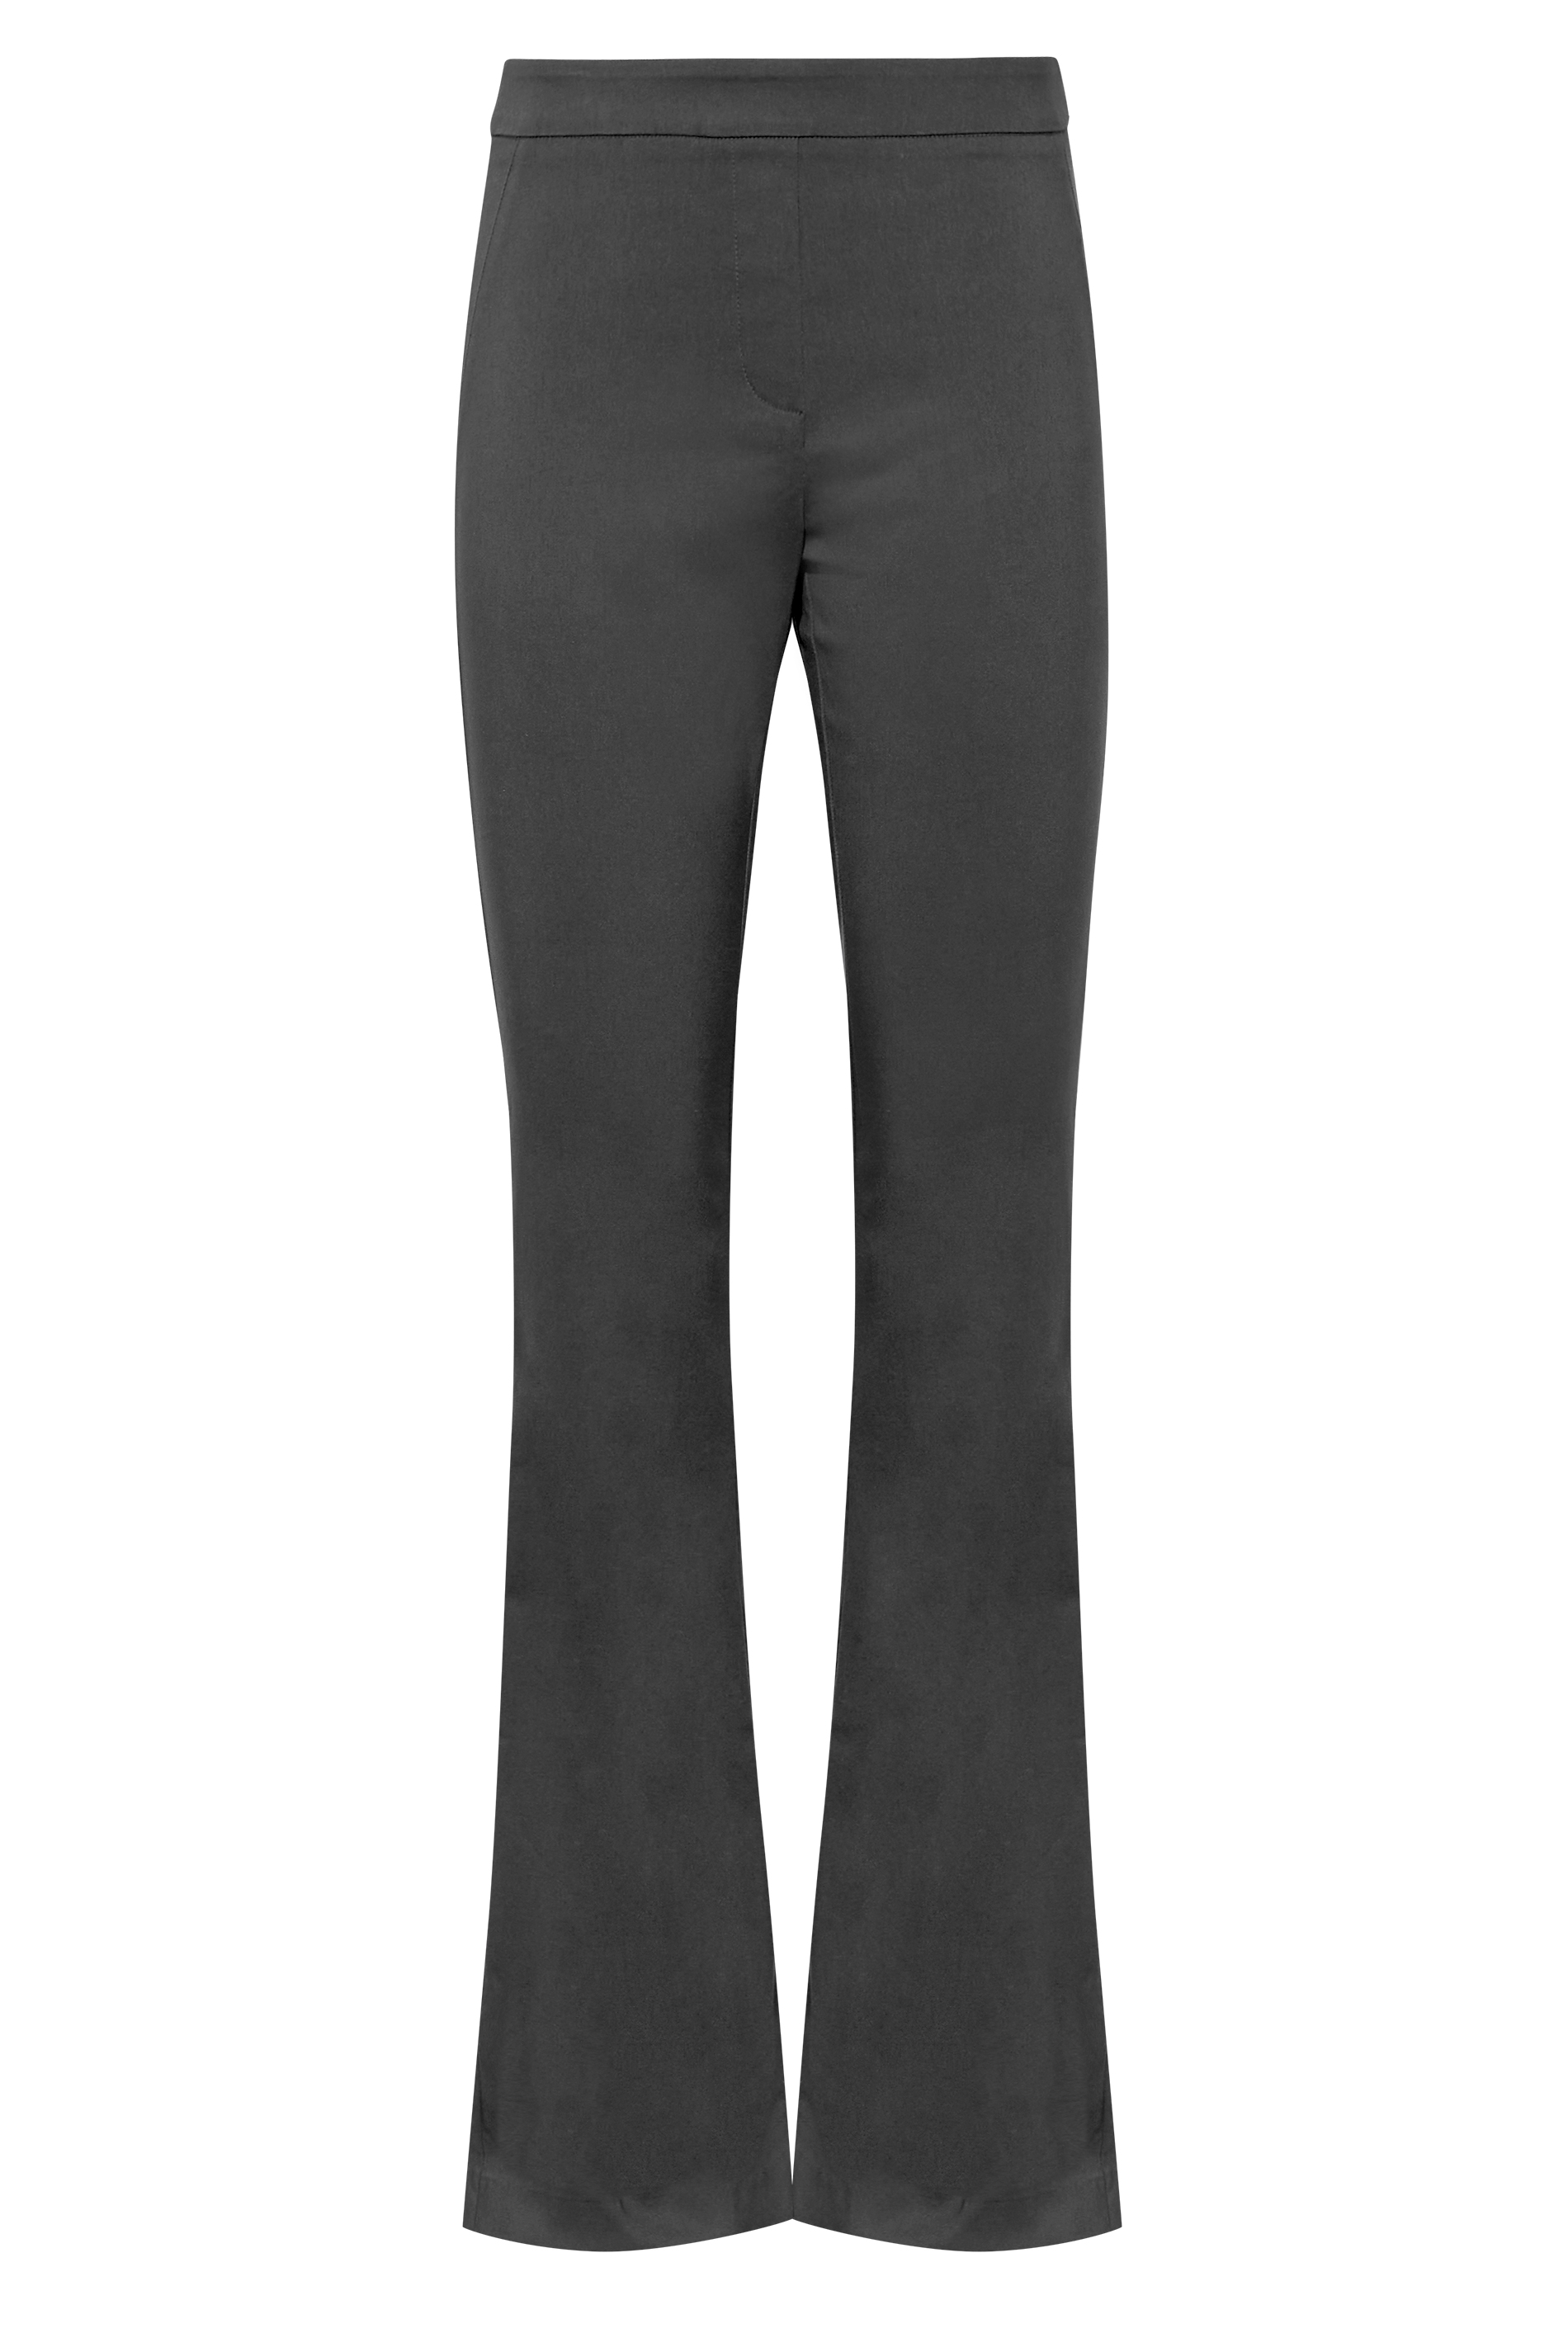 Buy PATRORNA Womens Straight Fit Bootcut Trousers (POL8A20_White_XS) at  Amazon.in